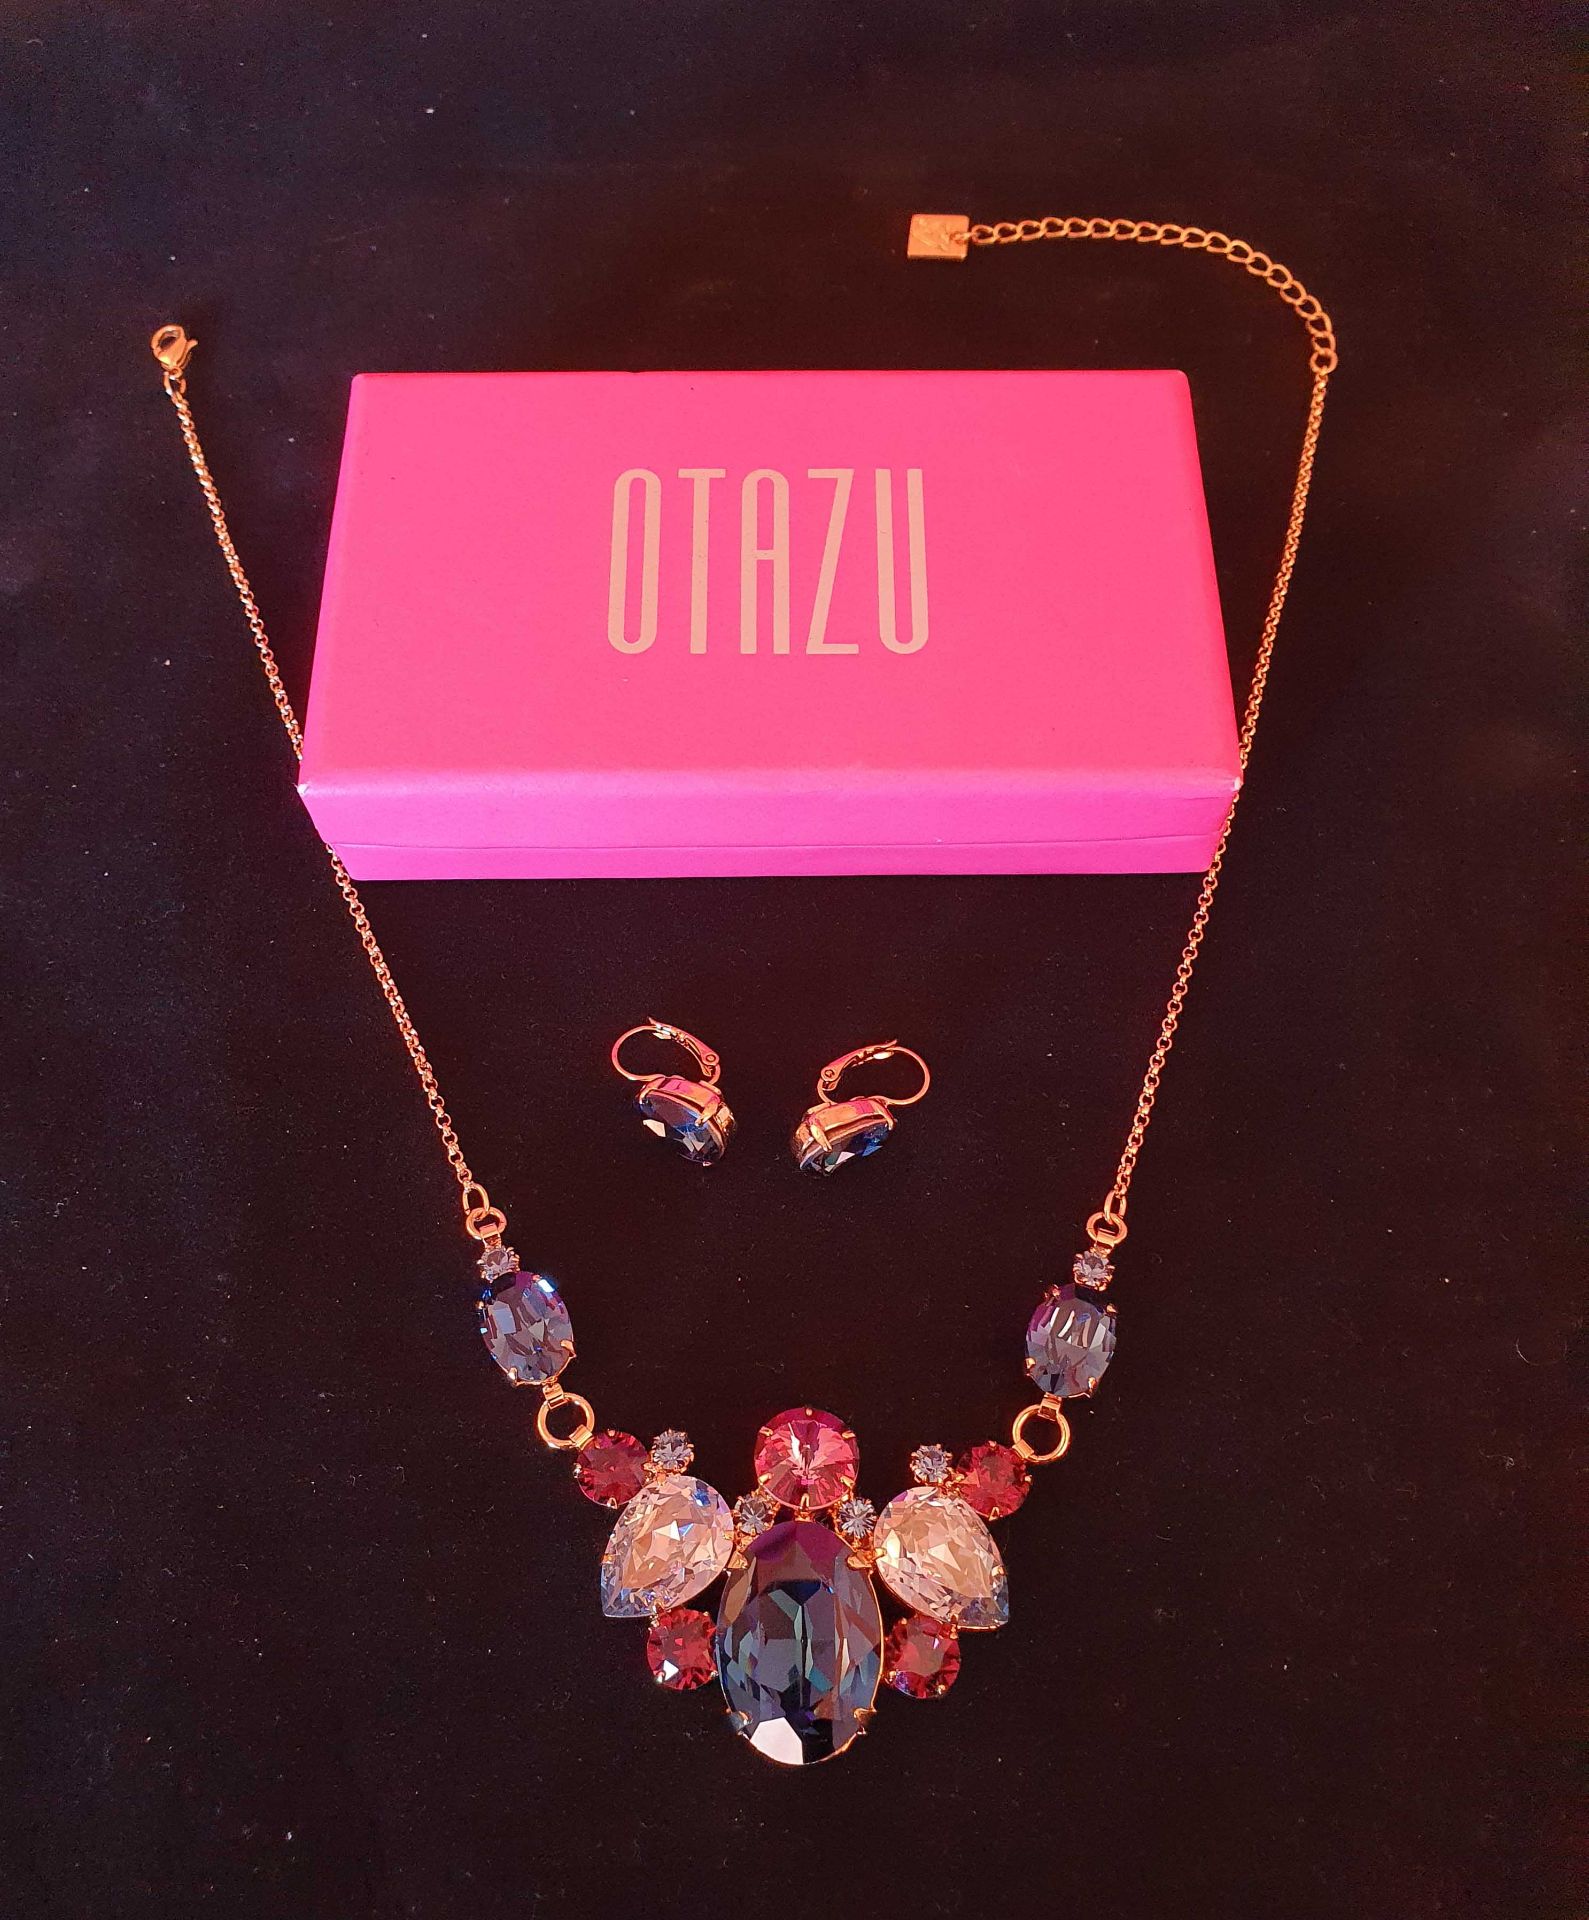 OTAZU Costume Jewellery Necklace and matching Earrings in Presentation Case